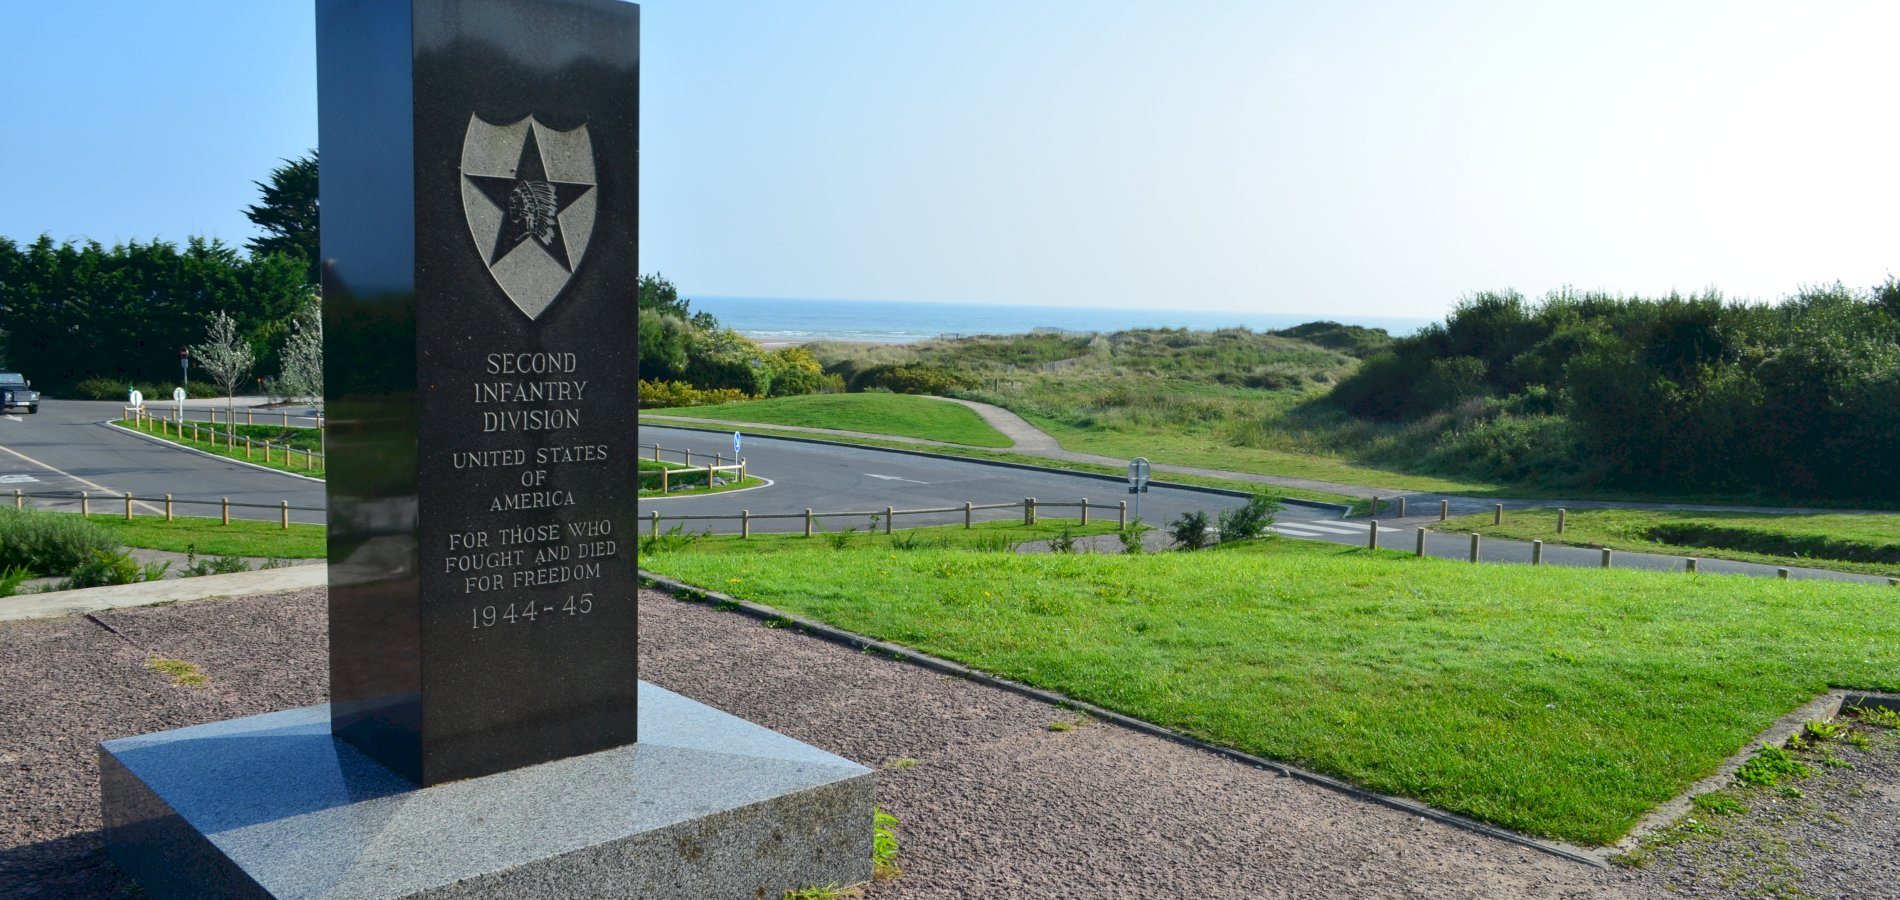 Ophorus Tours - U.S D-DAY Normandy Beaches Small Group Private Shore Excursion From Cherbourg